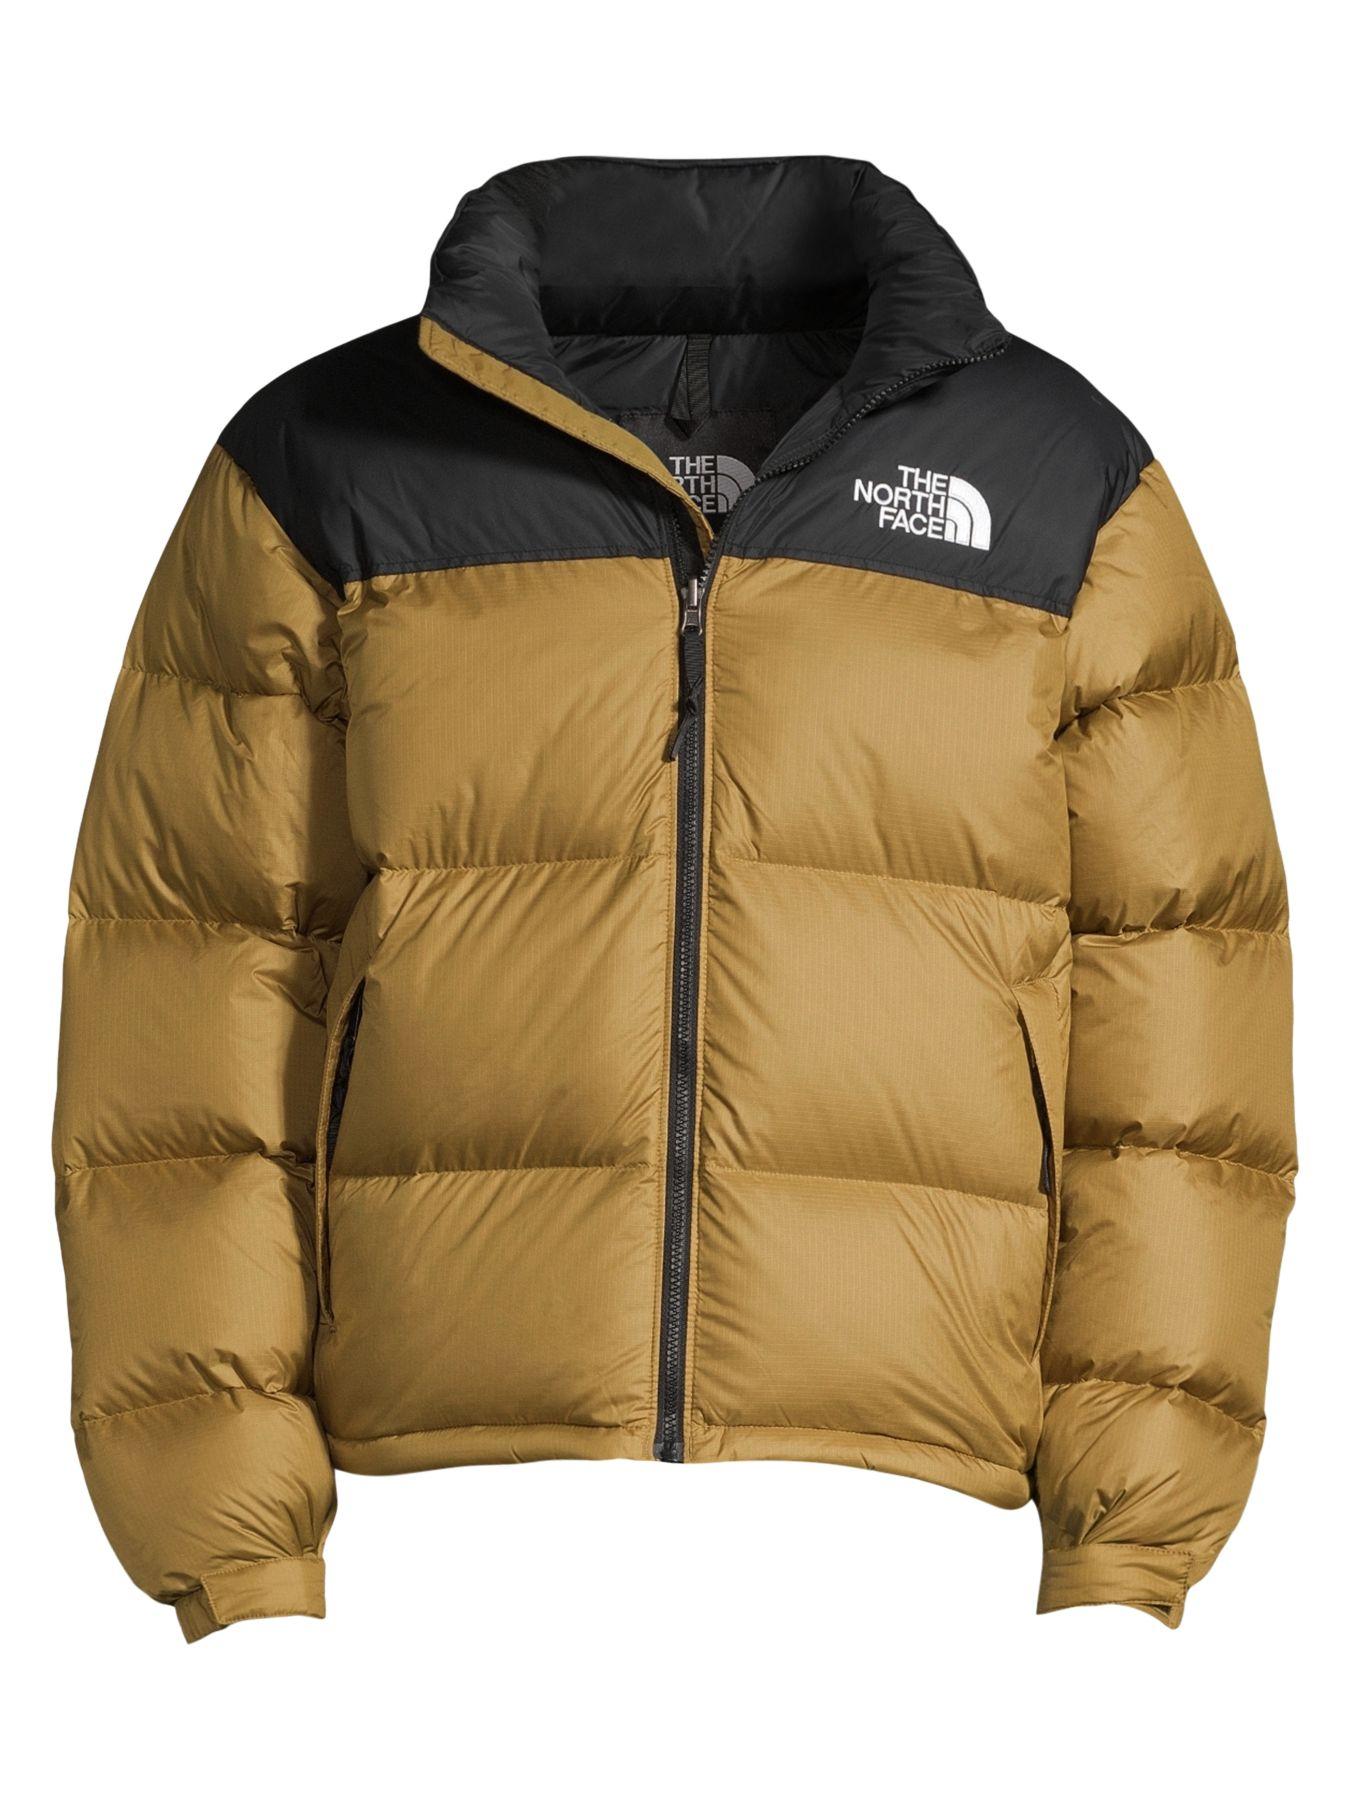 The North Face Goose 1996 Retro Nuptse Jacket for Men - Save 67 